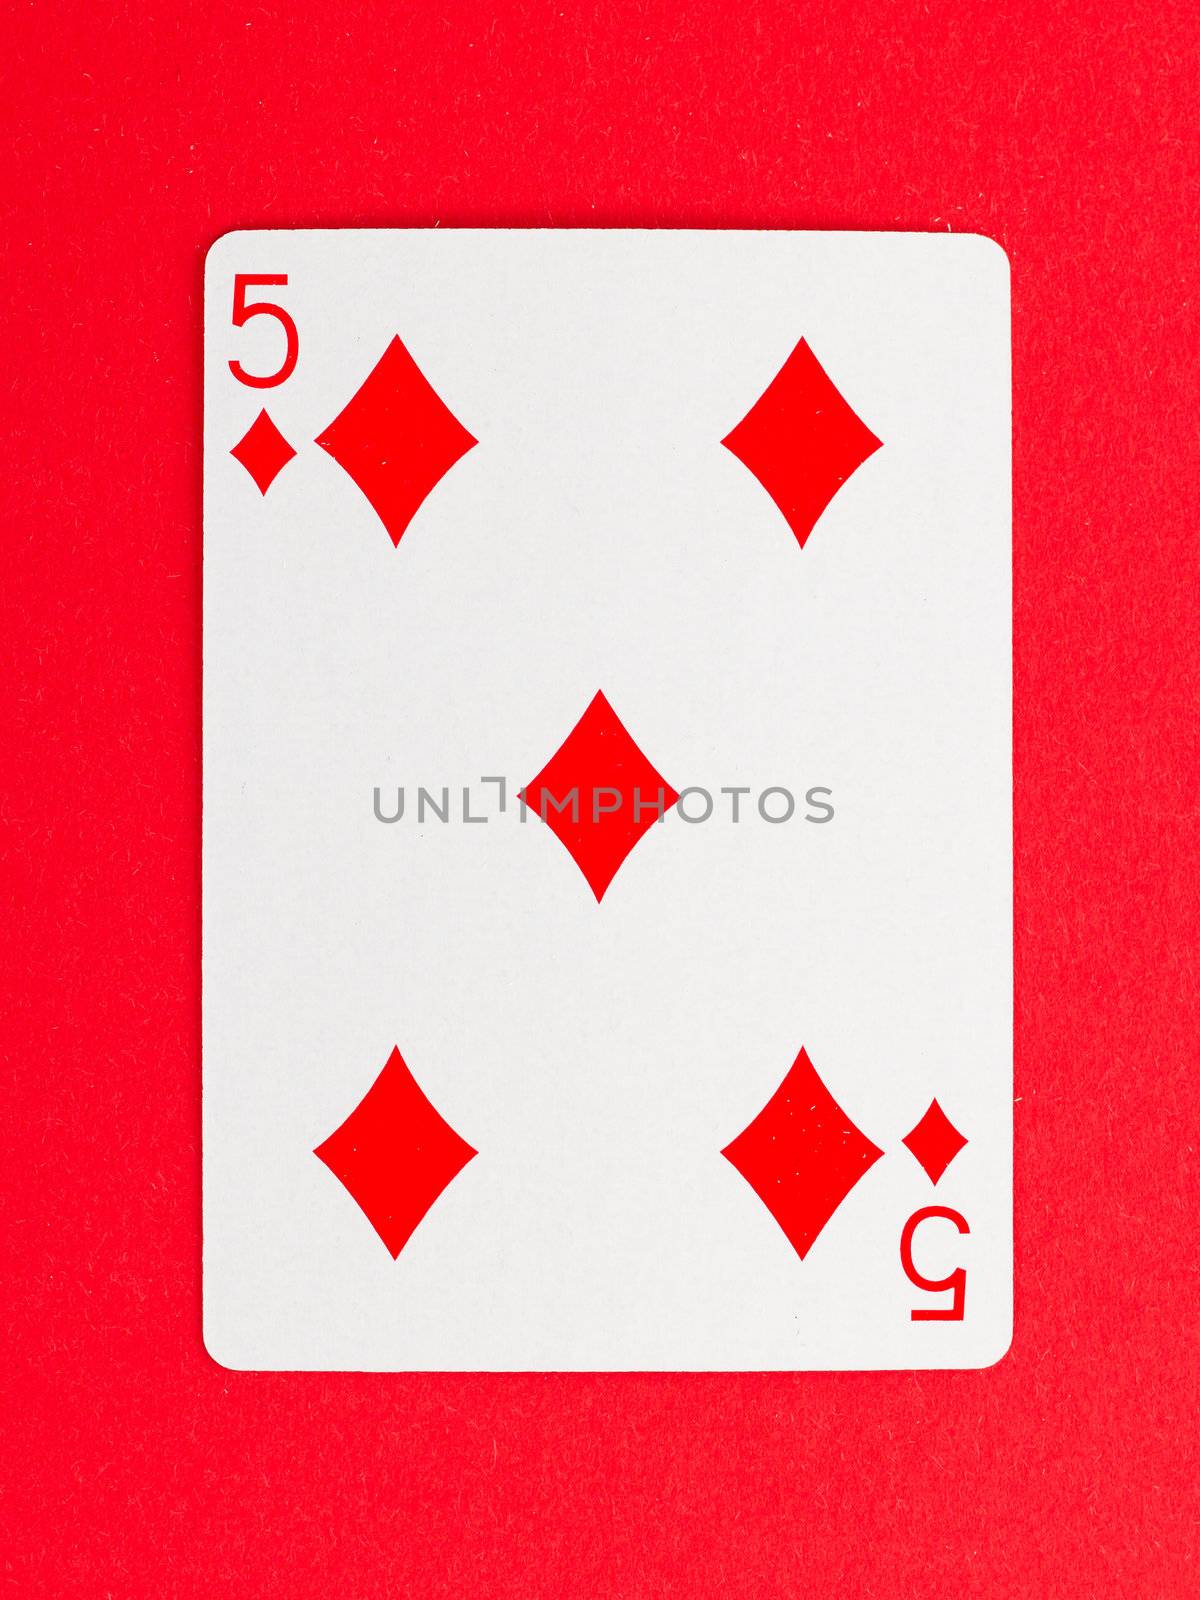 Old playing card (five) isolated on a red background